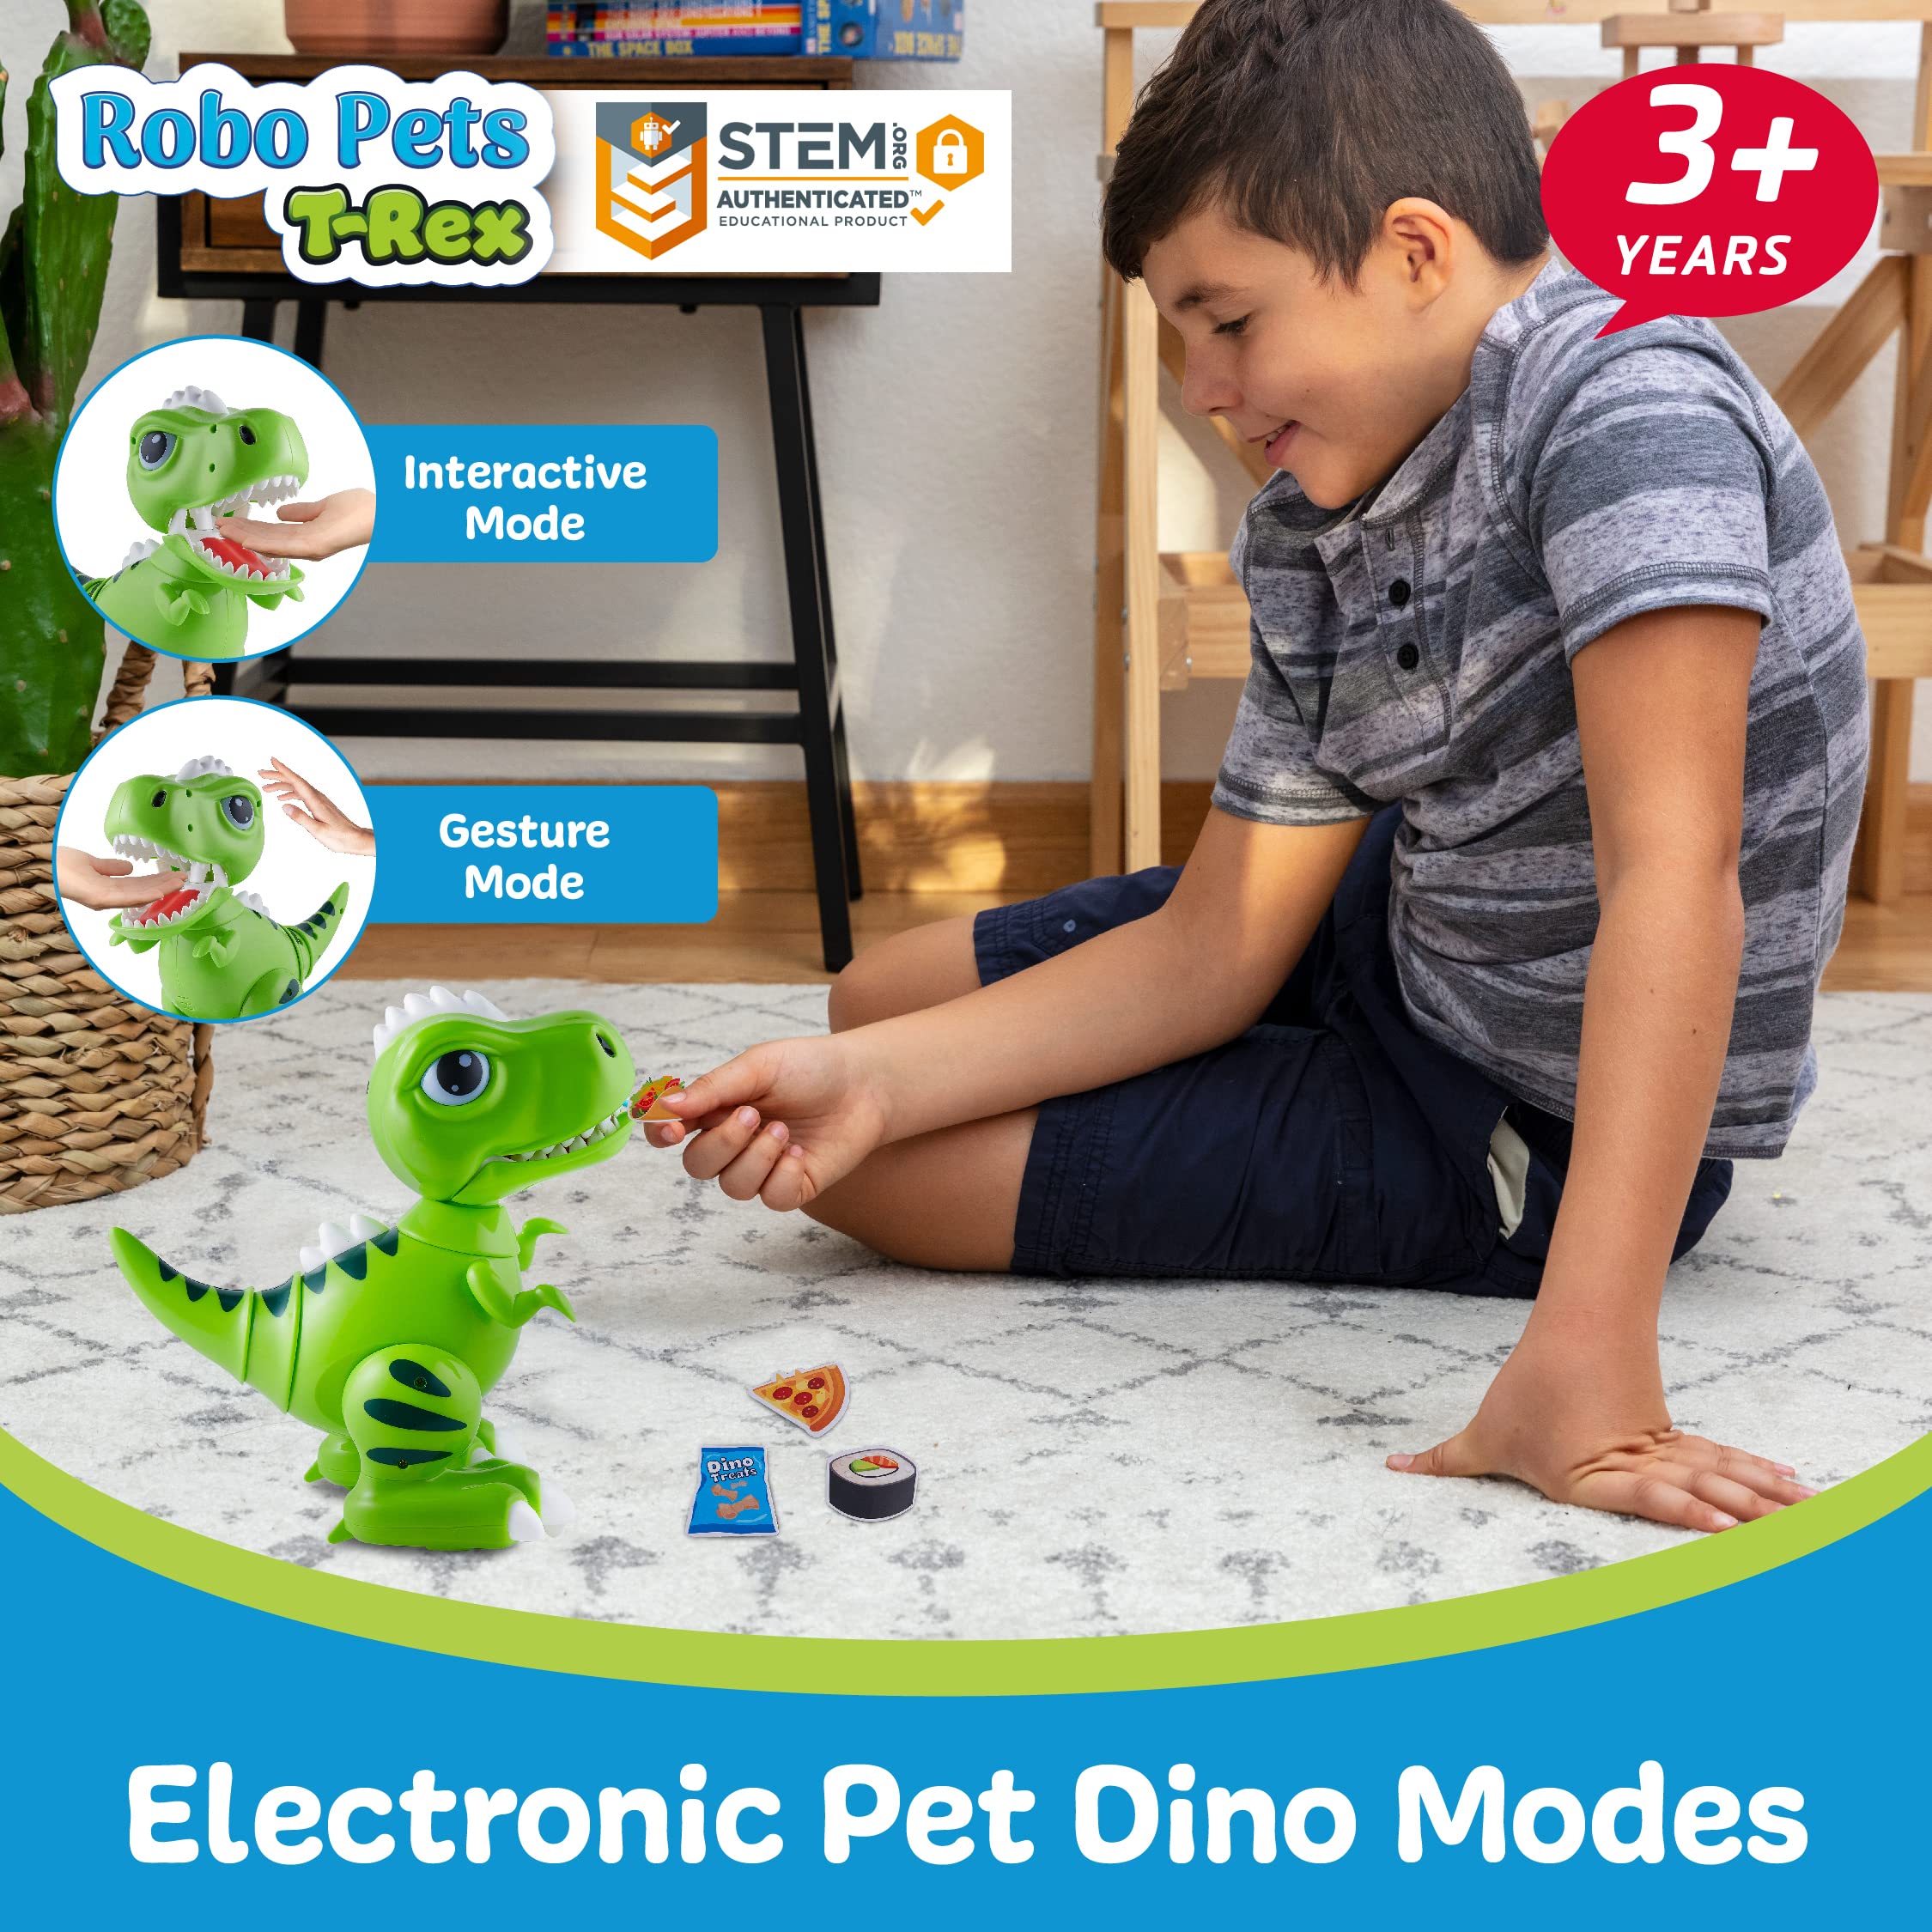 Robo Pets T-Rex Dinosaur Toy for Boys and Girls - Remote Control Robot Toy with LED Light Eyes, Interactive Hand Motion Gestures, STEM Toy Program Treats, Walking and Dancing Robot Dinosaur Kids Toy